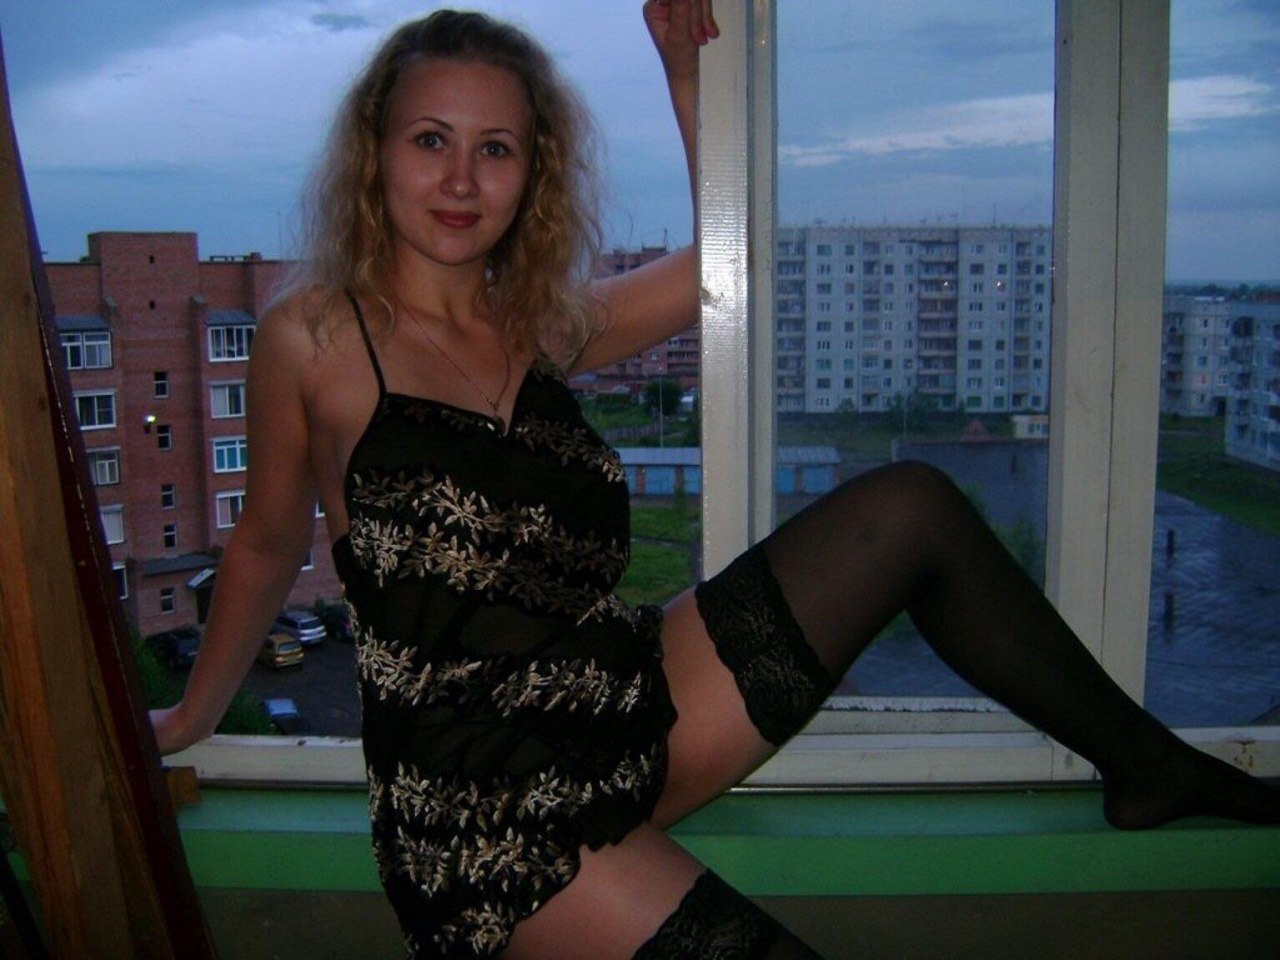 Russian milf and mature sexy moms horny amateur womans